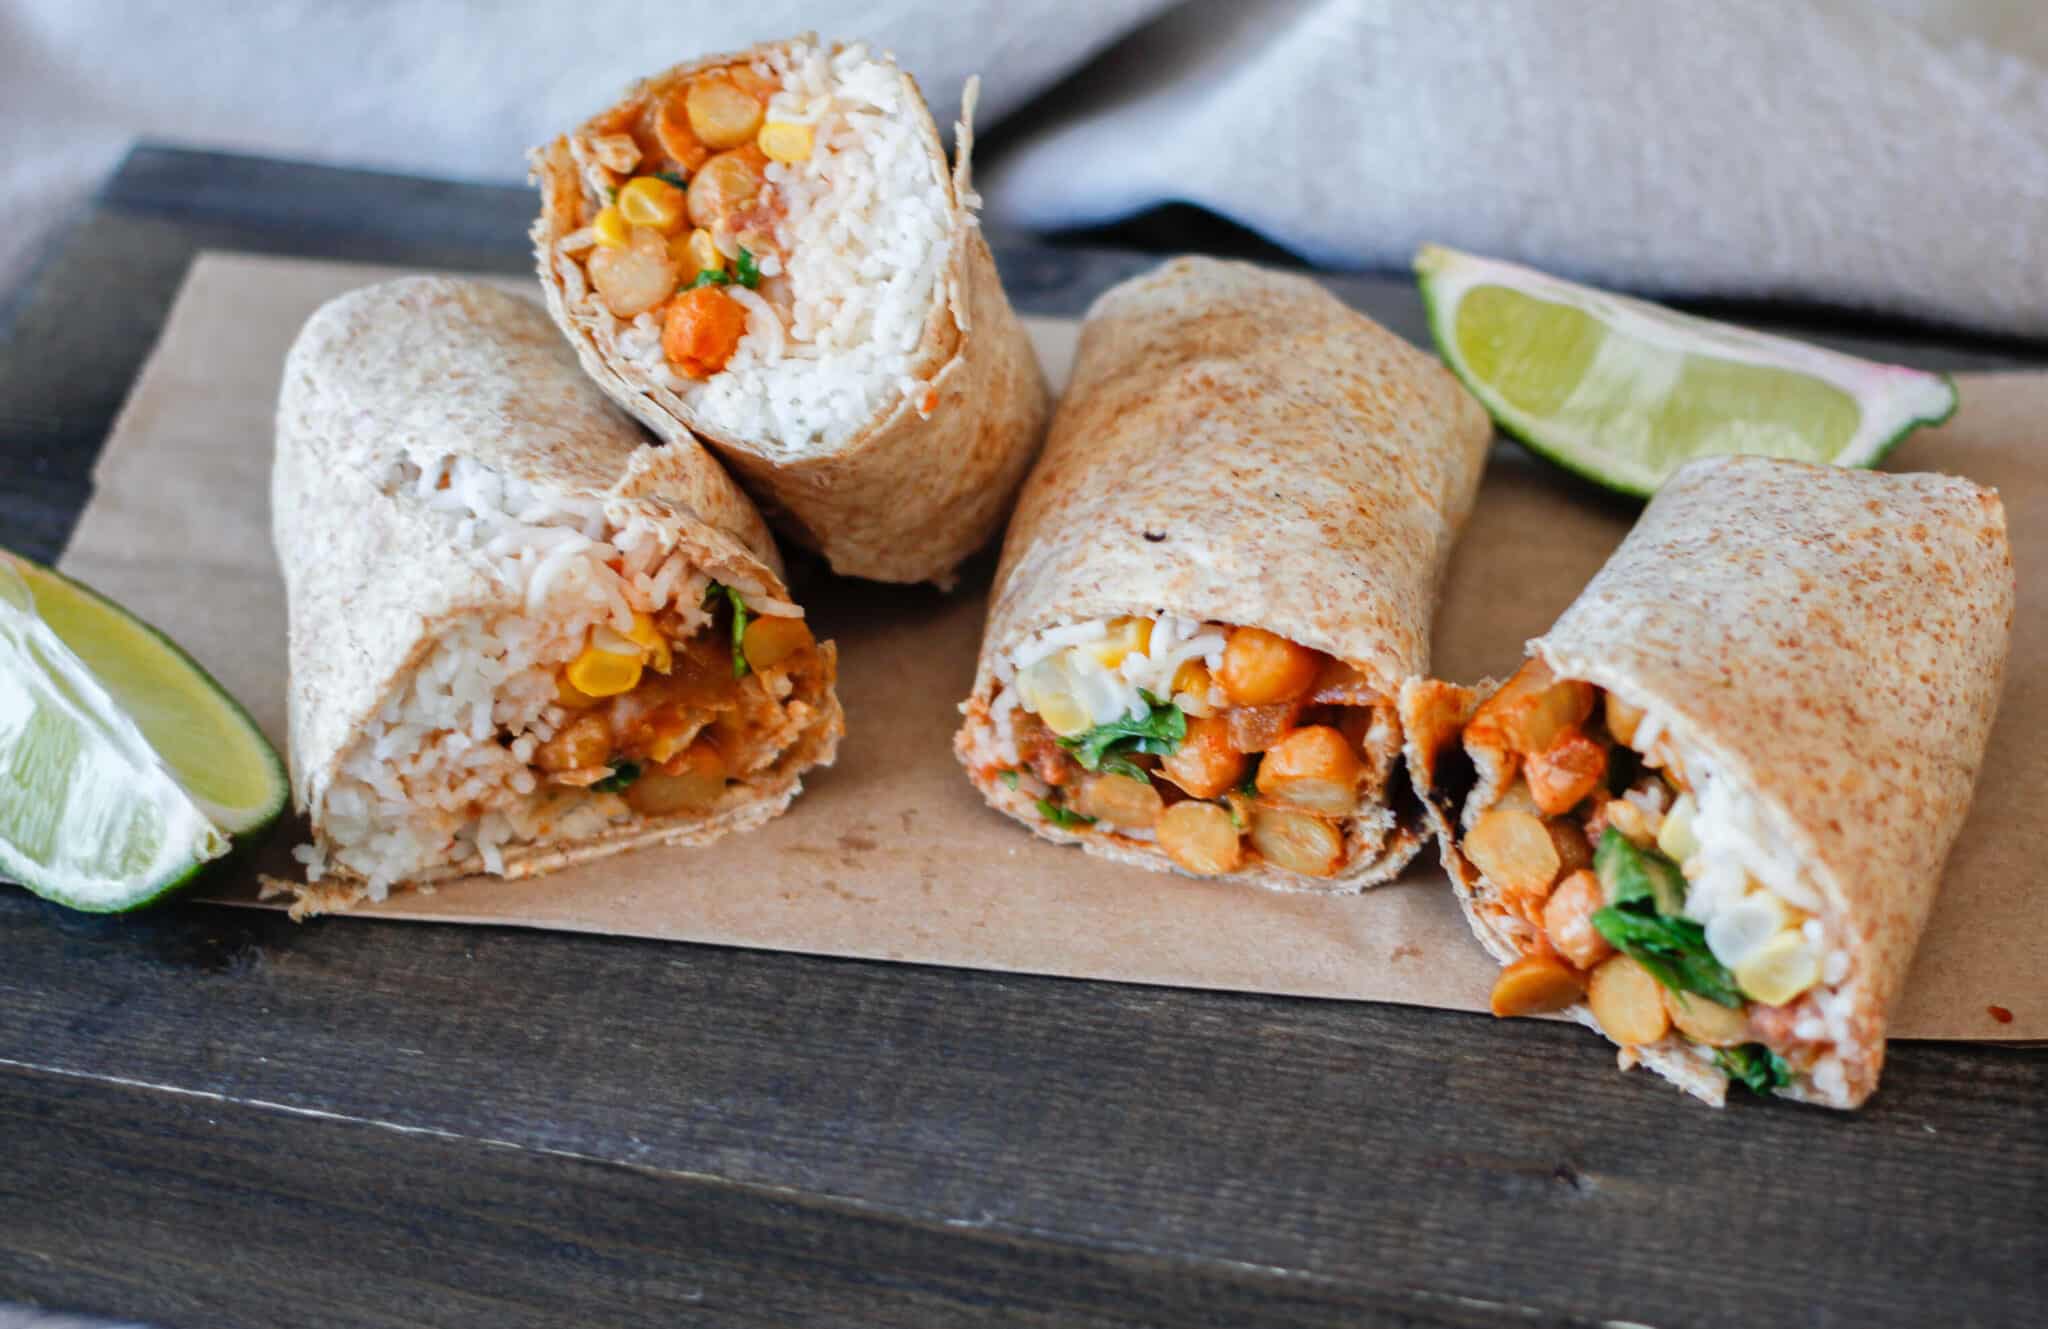 burrito with chickpeas and vegetable recipes